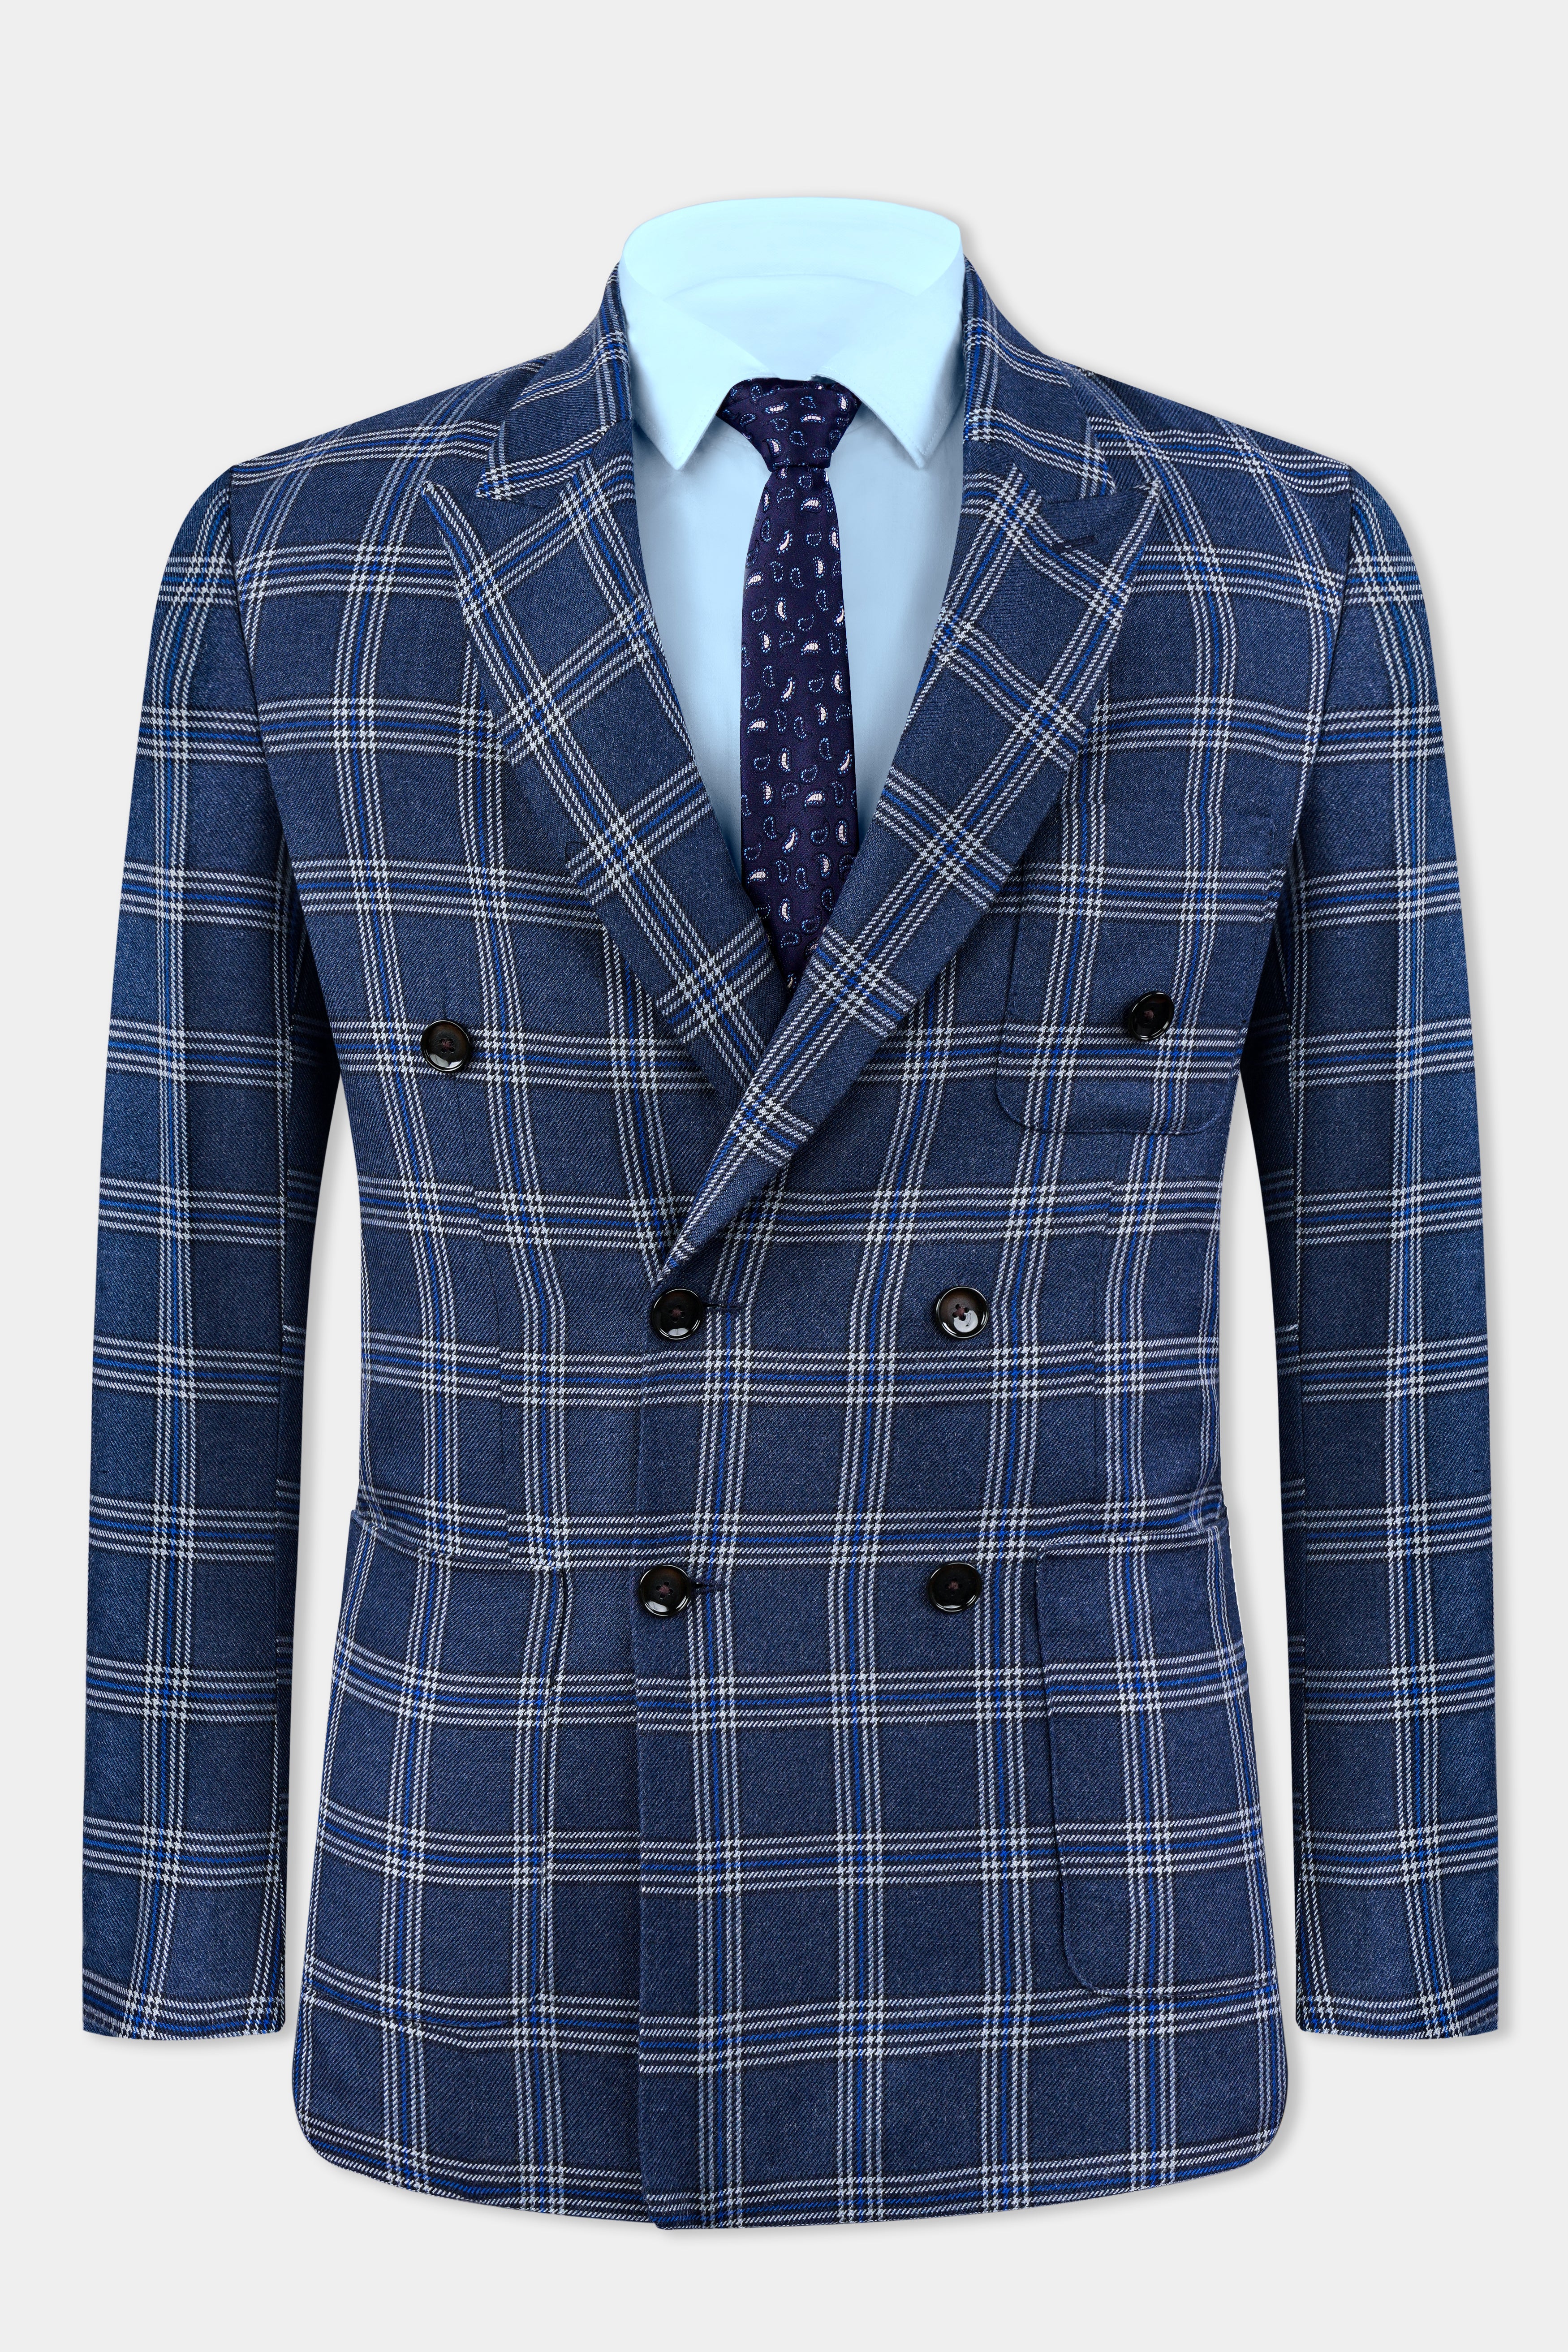 Cloud Blue and White Plaid Tweed Double Breasted Blazer BL3130-DB-PP-36, BL3130-DB-PP-38, BL3130-DB-PP-40, BL3130-DB-PP-42, BL3130-DB-PP-44, BL3130-DB-PP-46, BL3130-DB-PP-48, BL3130-DB-PP-50, BL3130-DB-PP-52, BL3130-DB-PP-54, BL3130-DB-PP-56, BL3130-DB-PP-58, BL3130-DB-PP-60